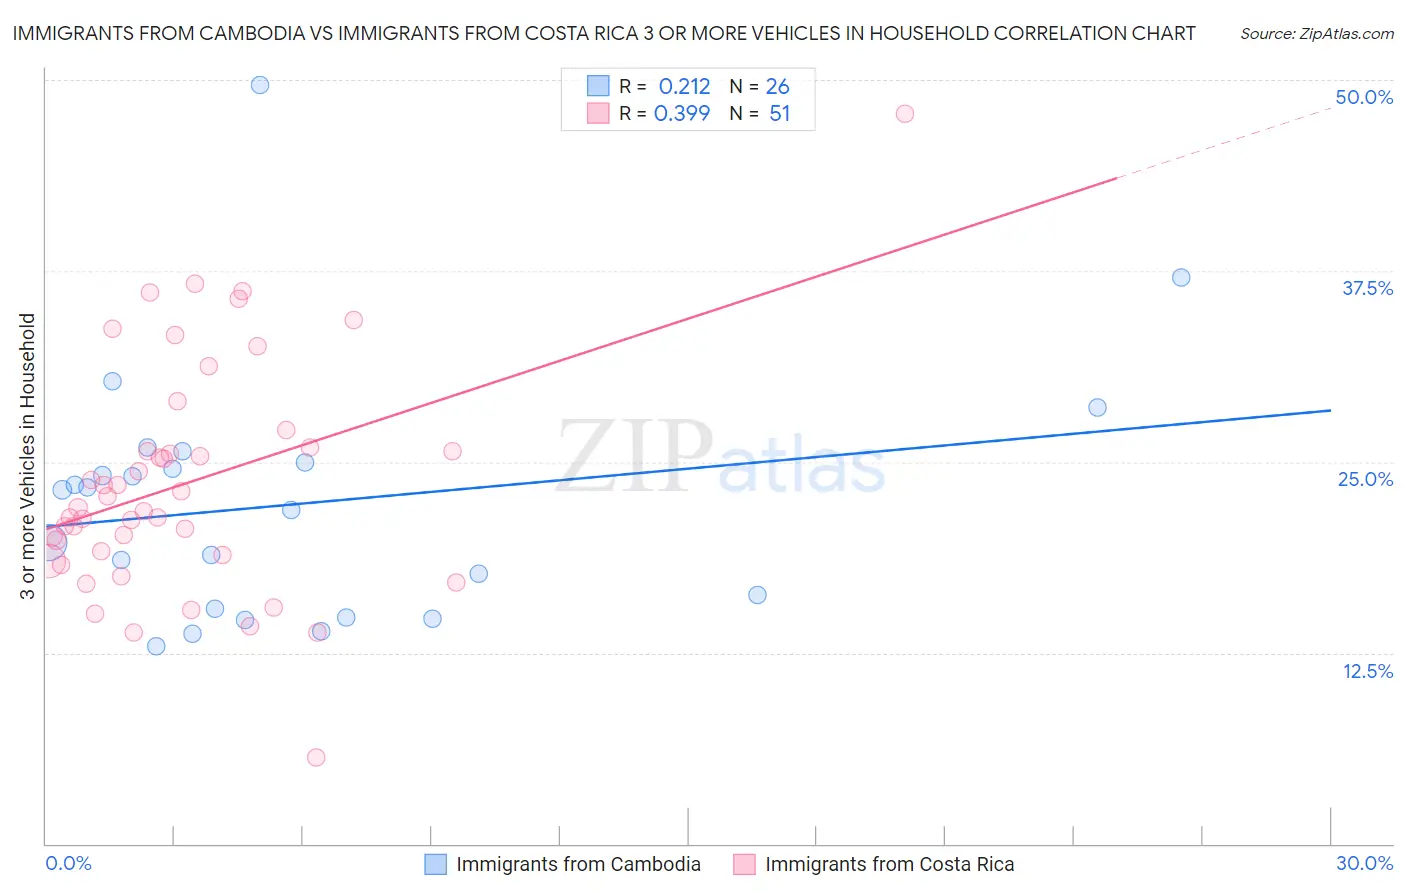 Immigrants from Cambodia vs Immigrants from Costa Rica 3 or more Vehicles in Household